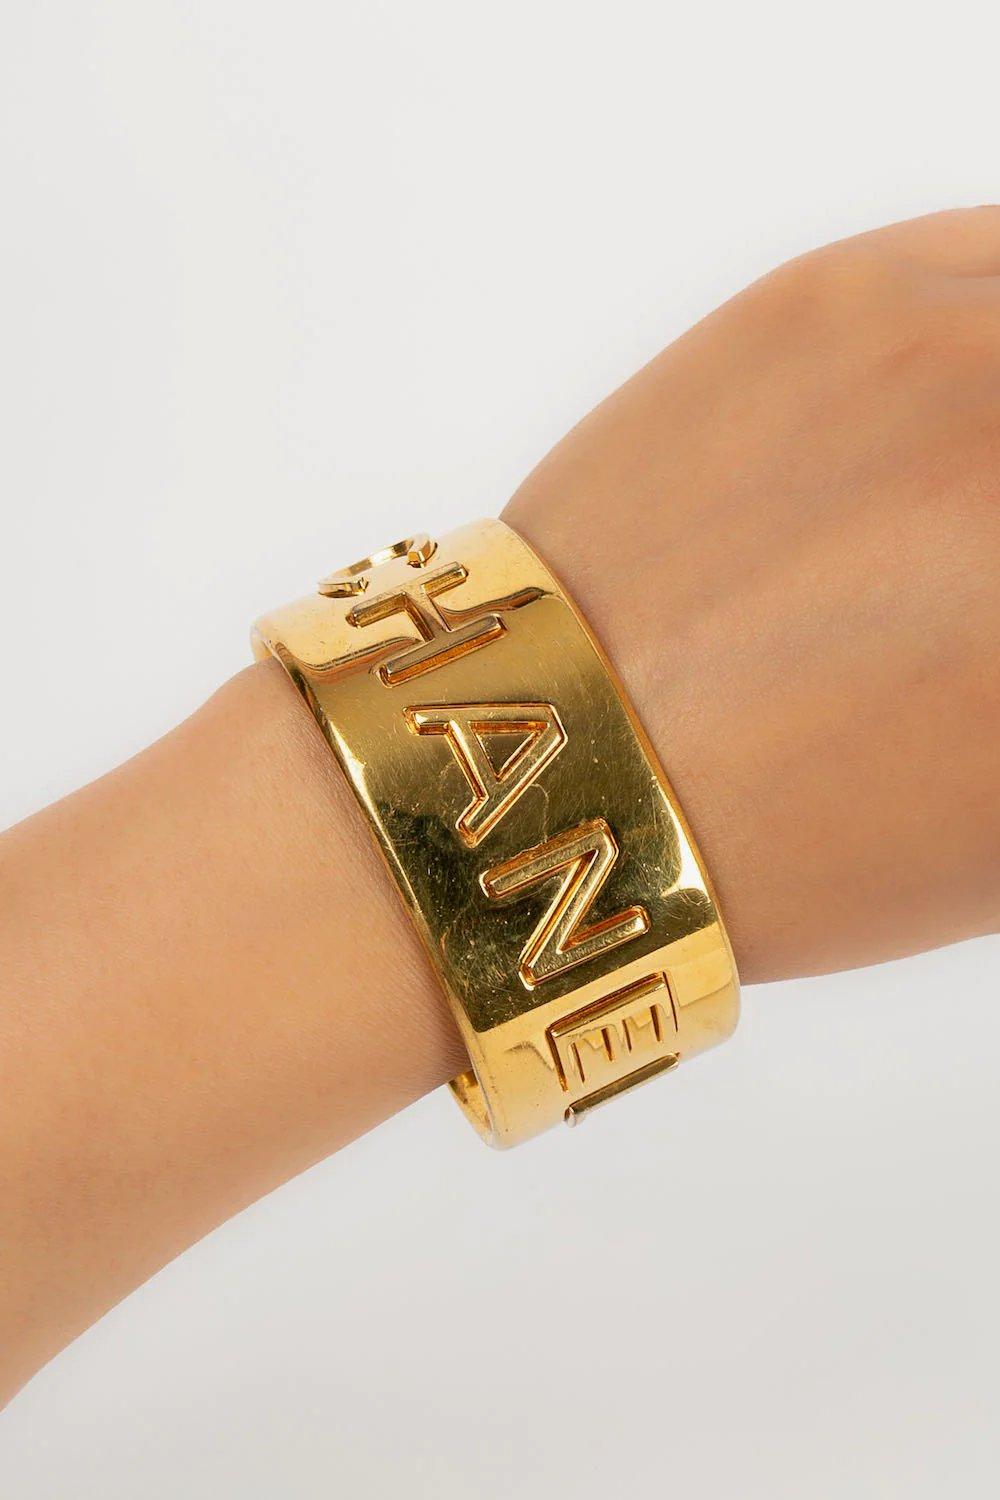 Chanel Cuff in Gold, Fall 1997 For Sale 4